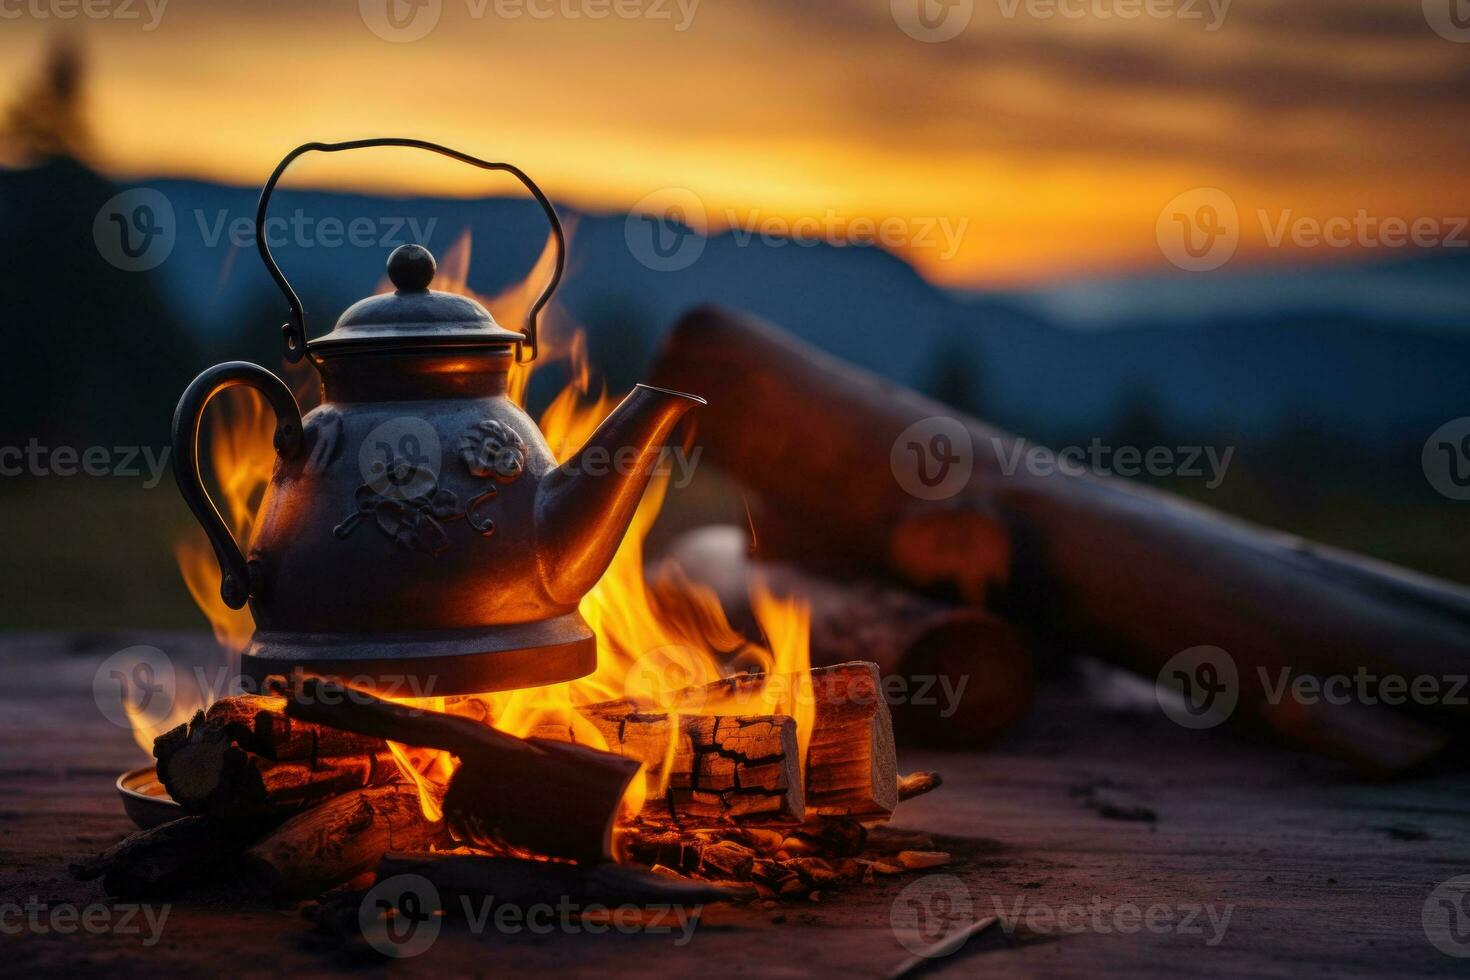 https://static.vecteezy.com/system/resources/previews/026/915/048/non_2x/vintage-coffee-pot-on-camping-fire-evening-atmospheric-background-of-campfire-generative-ai-photo.jpg